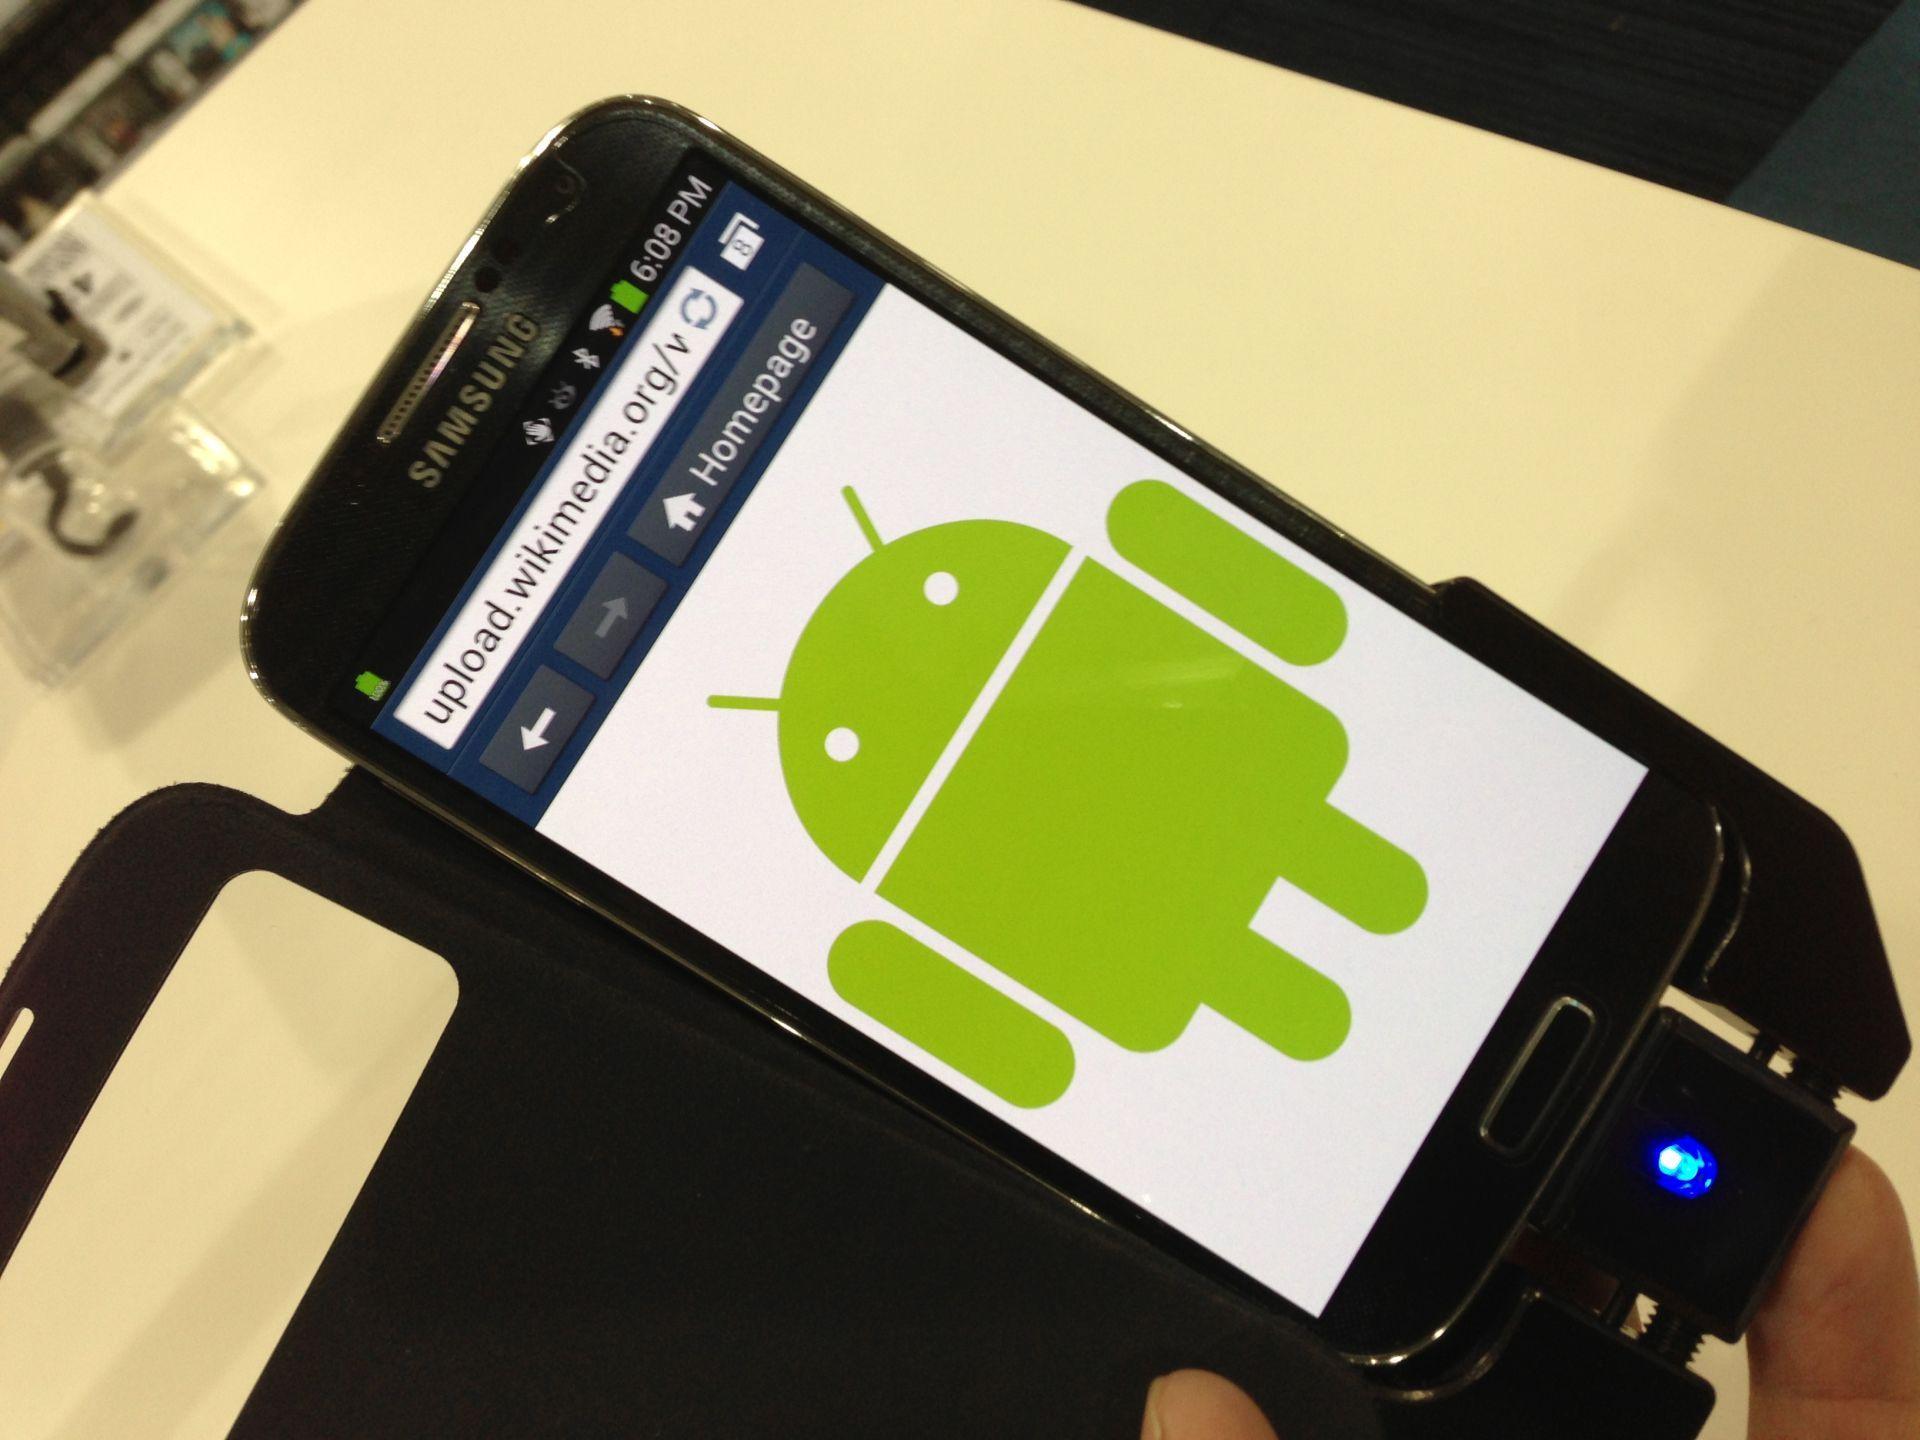 Little Green Robot Logo - File:Samsung Phone with Android Robot icon.jpg - Wikimedia Commons